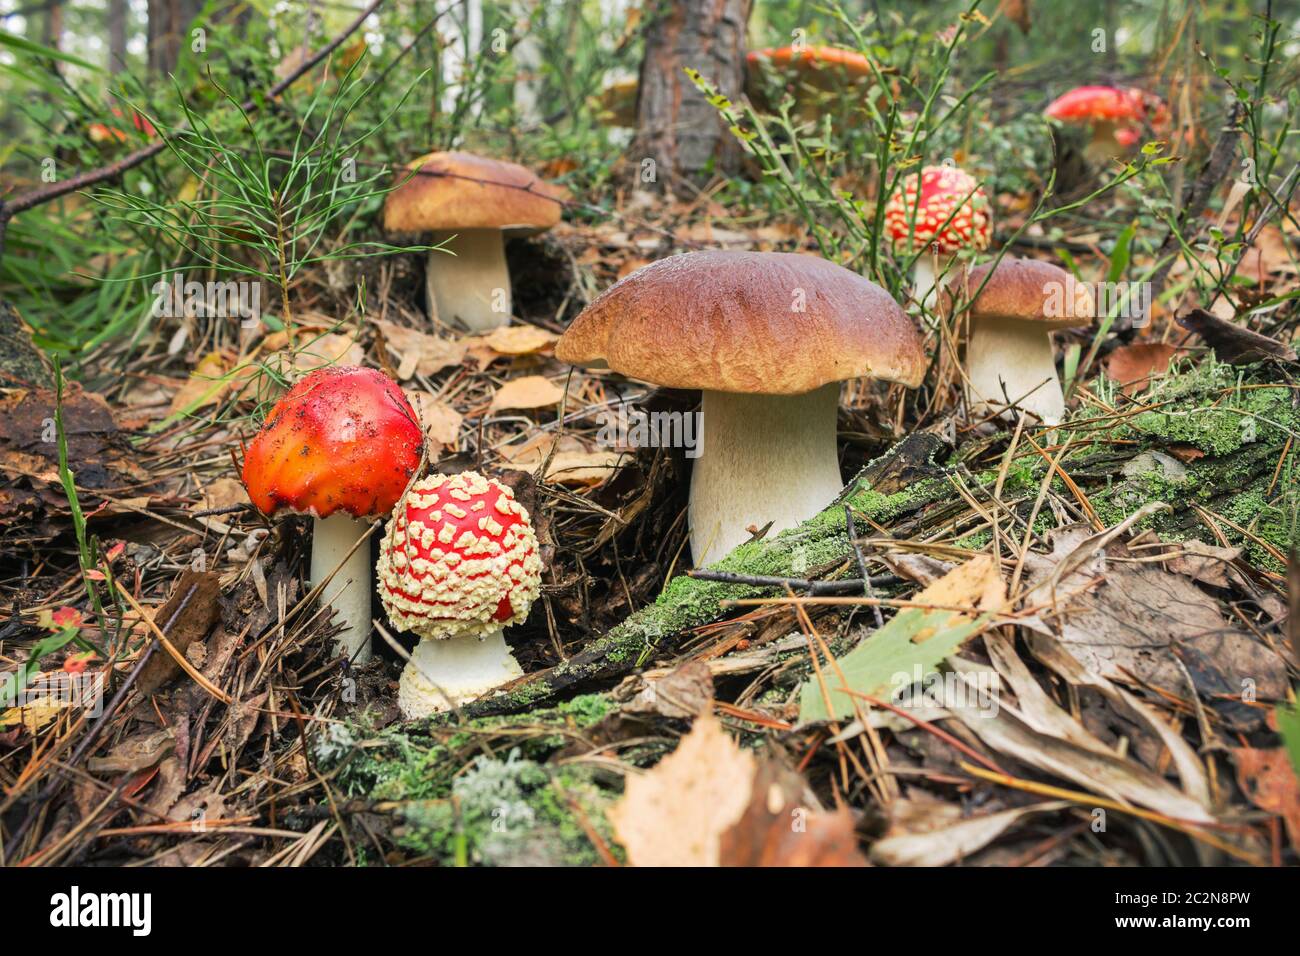 Variety of mushrooms grown up together in the woods Stock Photo